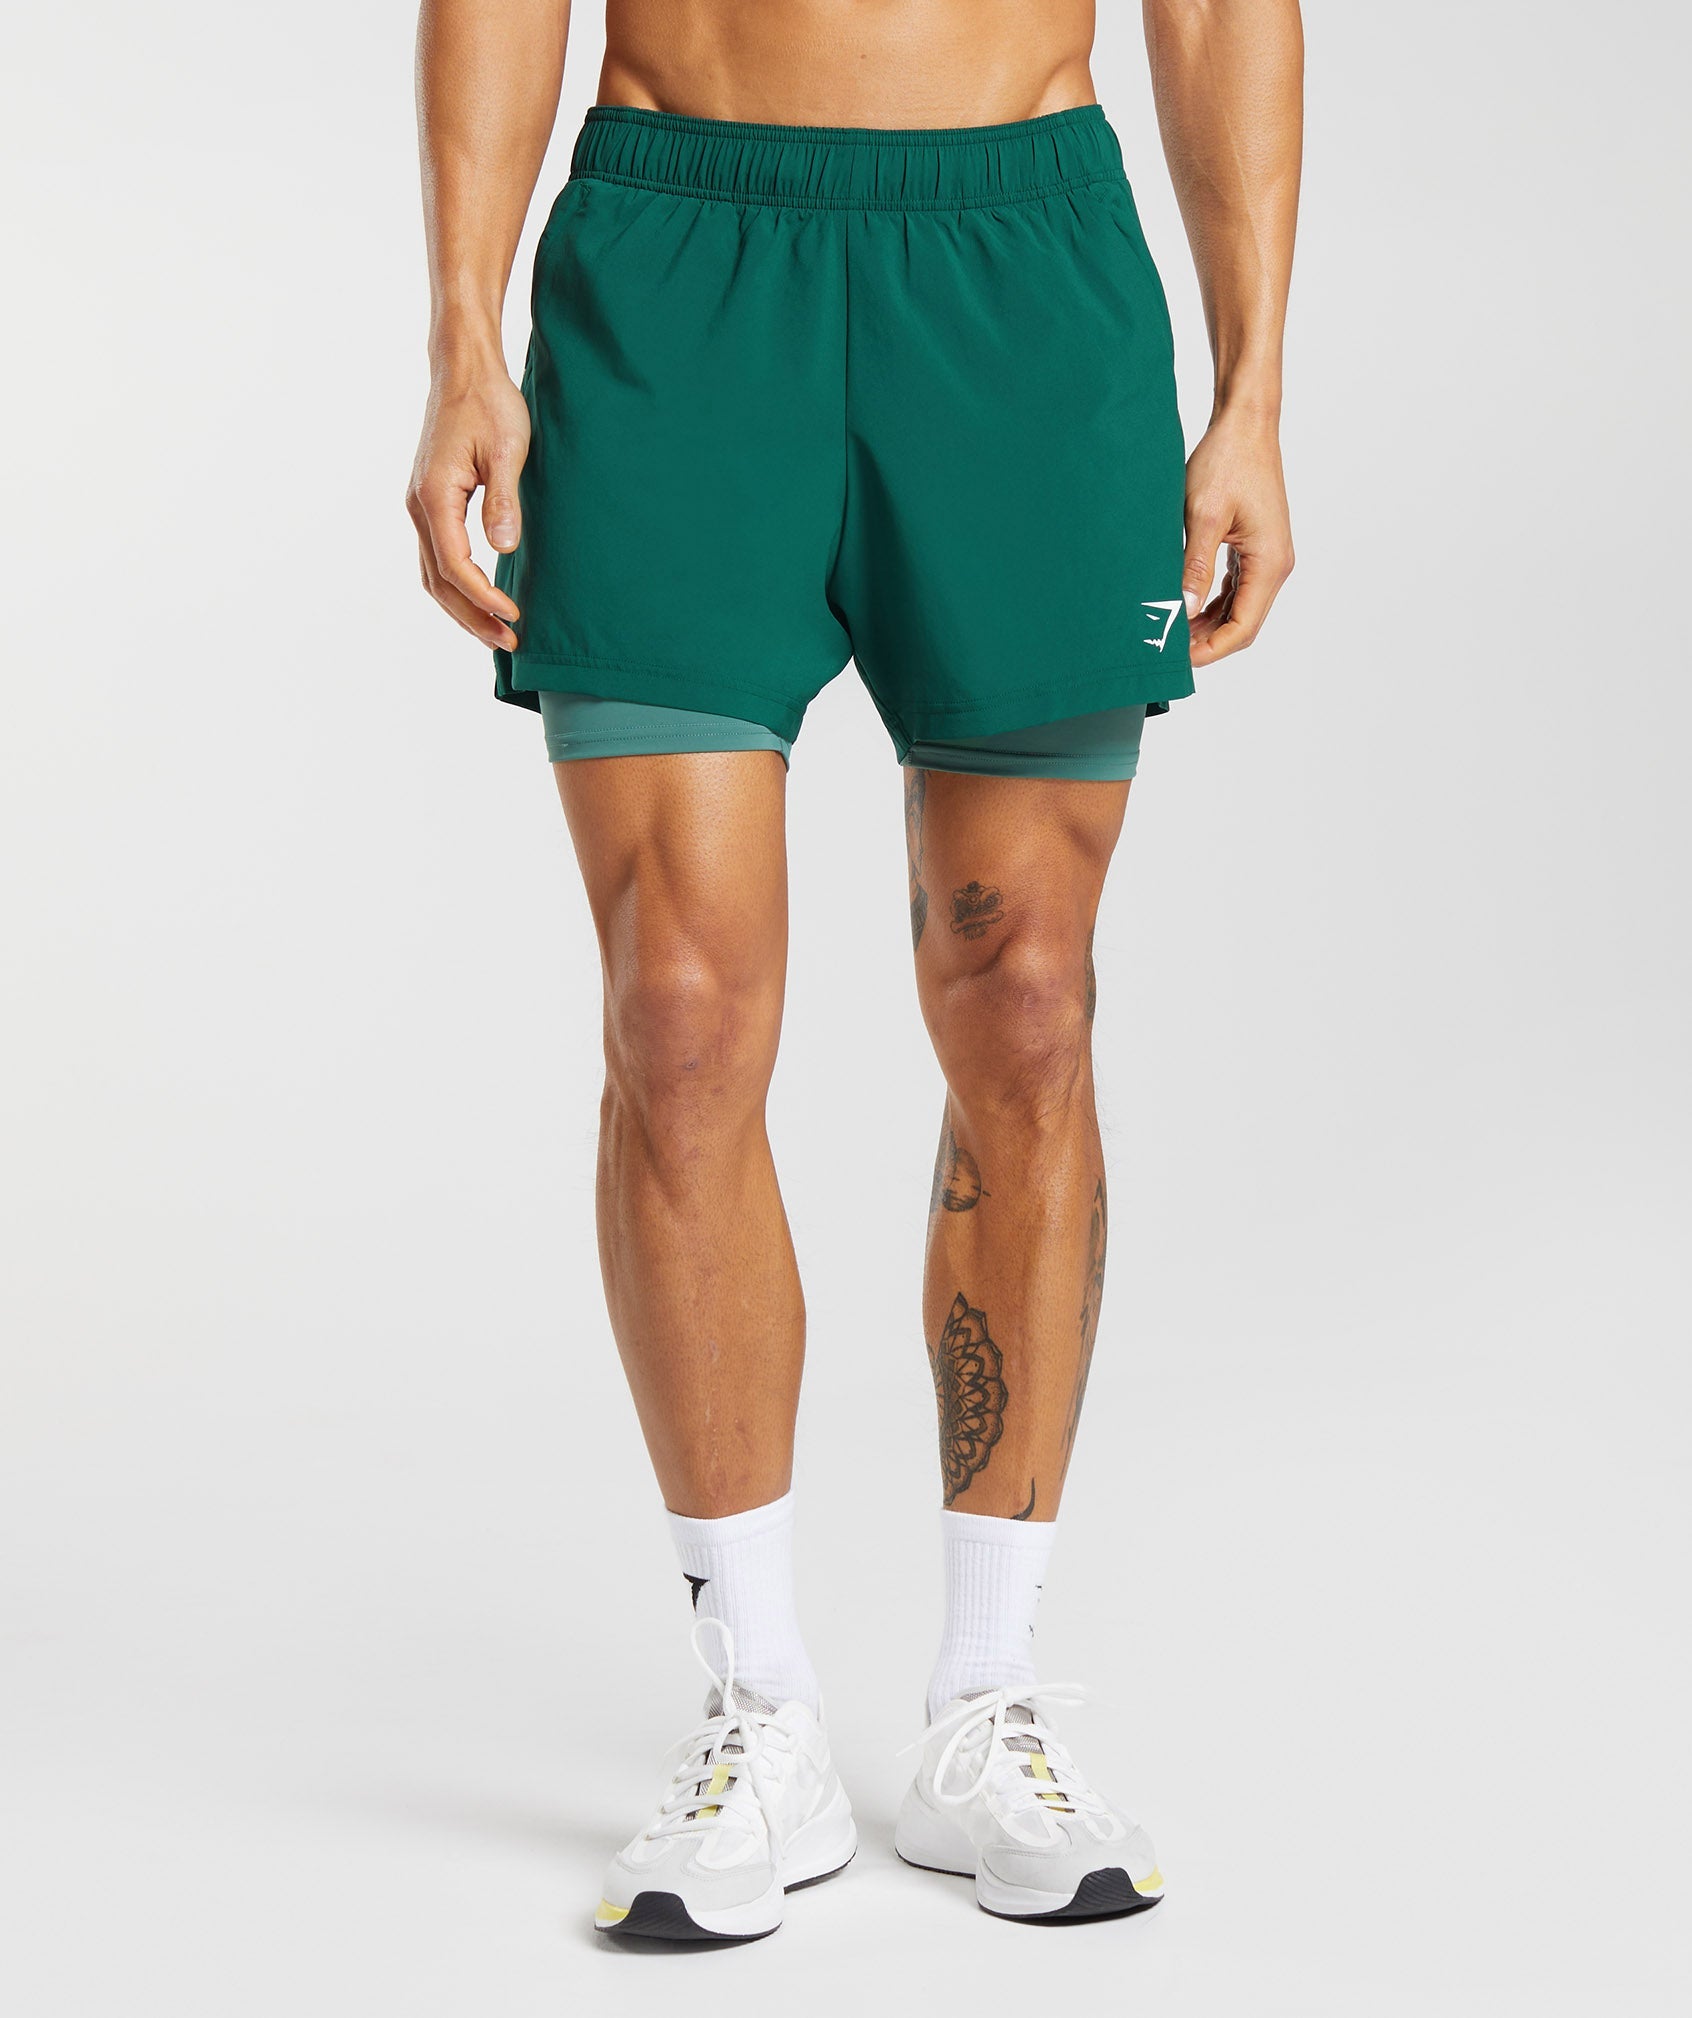 Sport 5" 2 In 1 Shorts in Woodland Green/Hoya Green - view 1